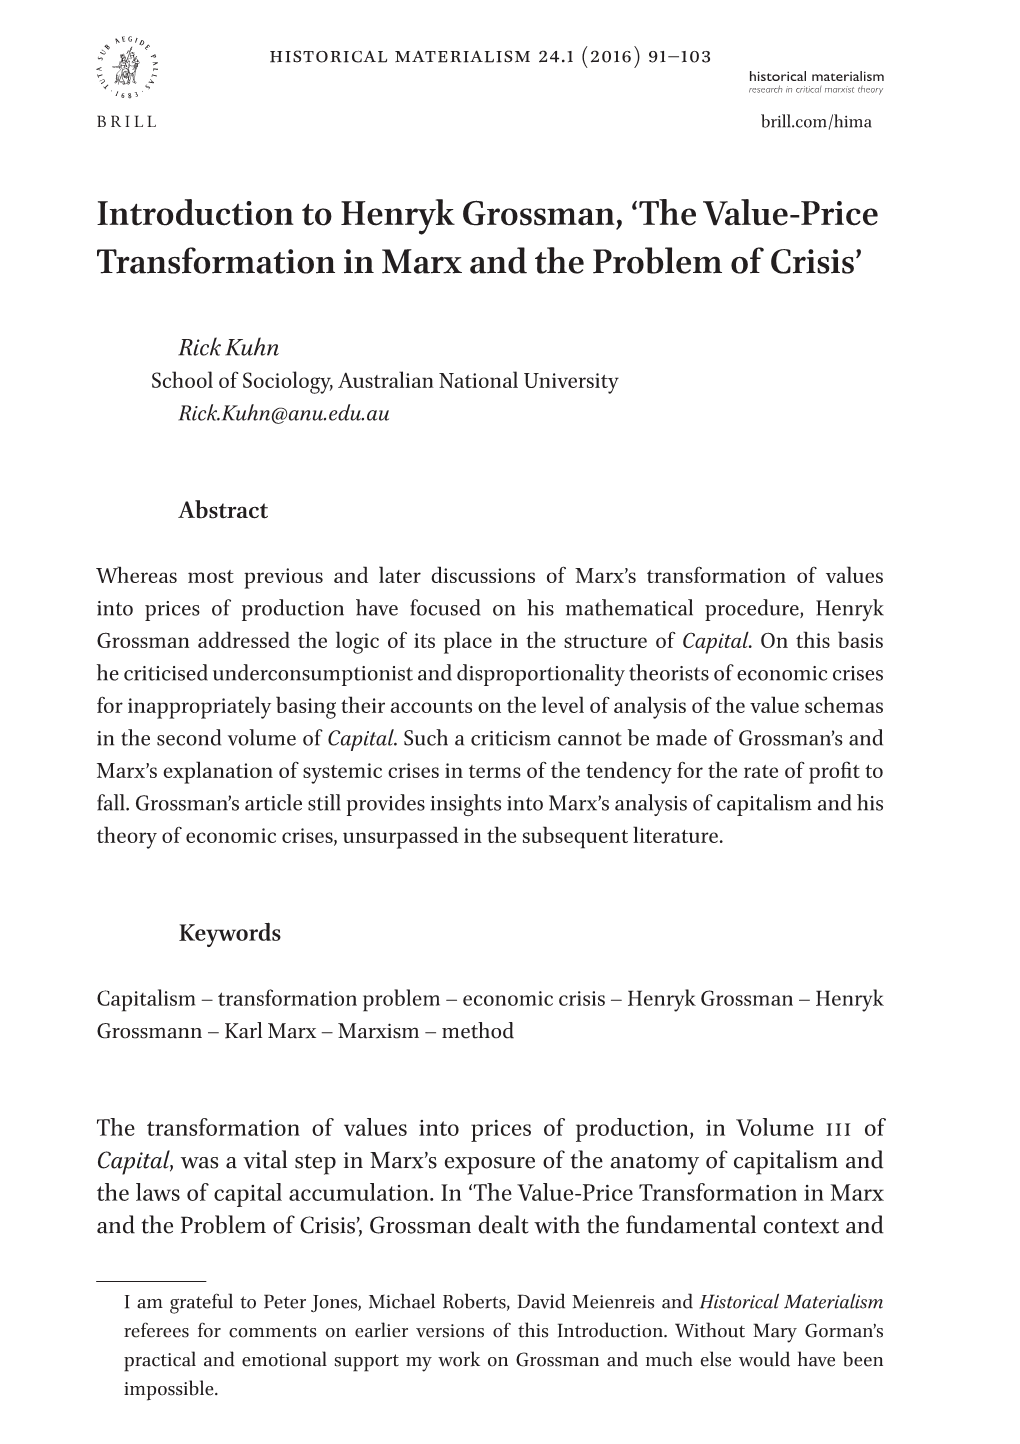 Introduction to Henryk Grossman, ‘The Value-Price Transformation in Marx and the Problem of Crisis’